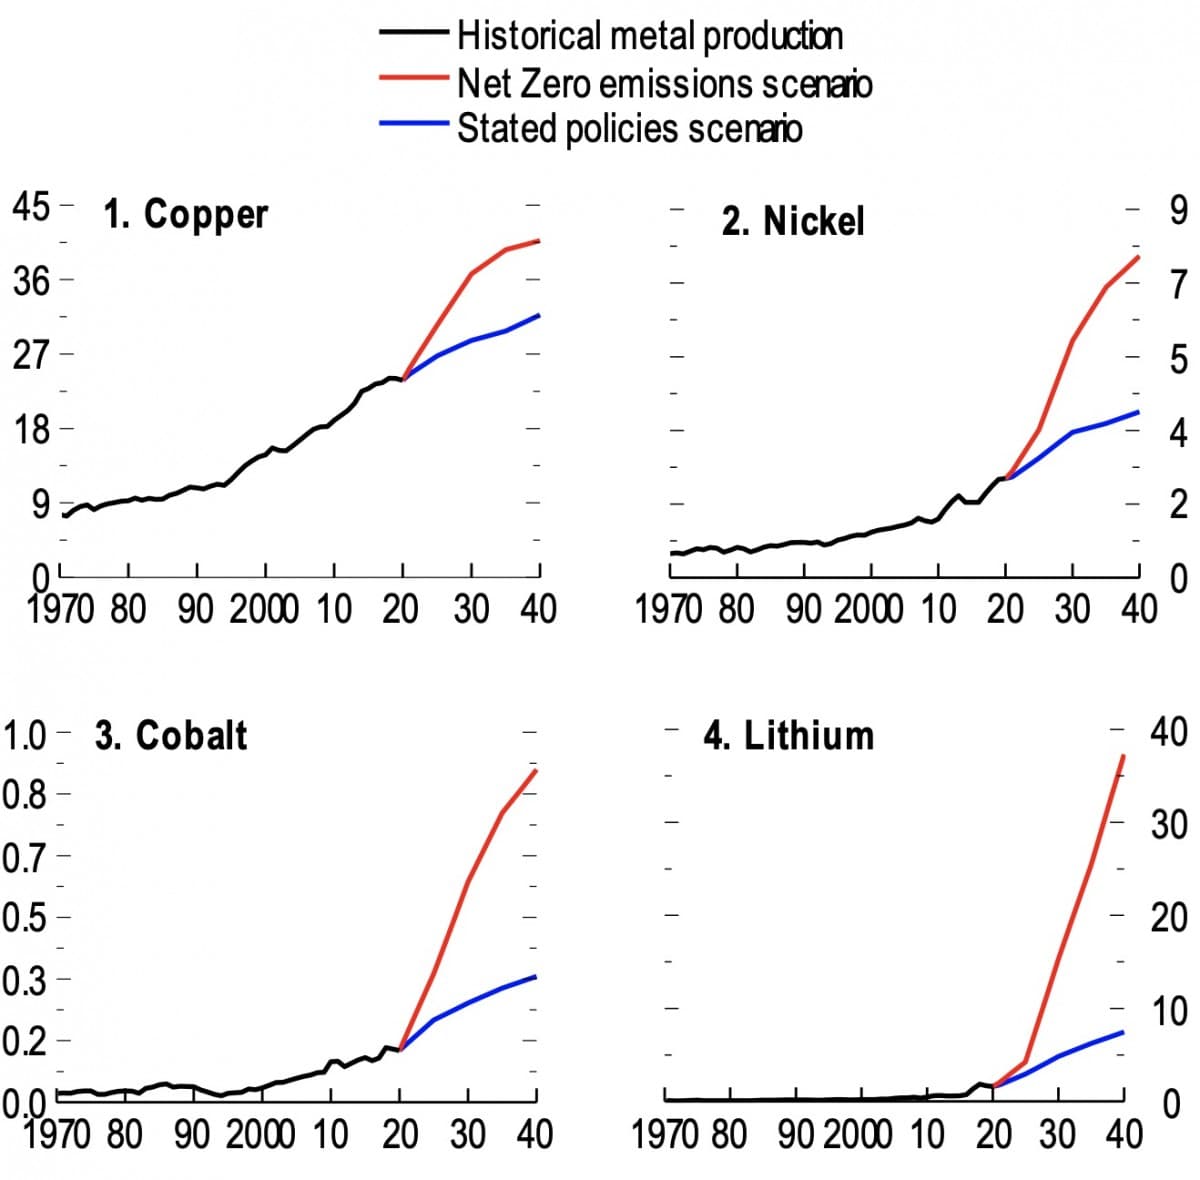 Historical Metal Production